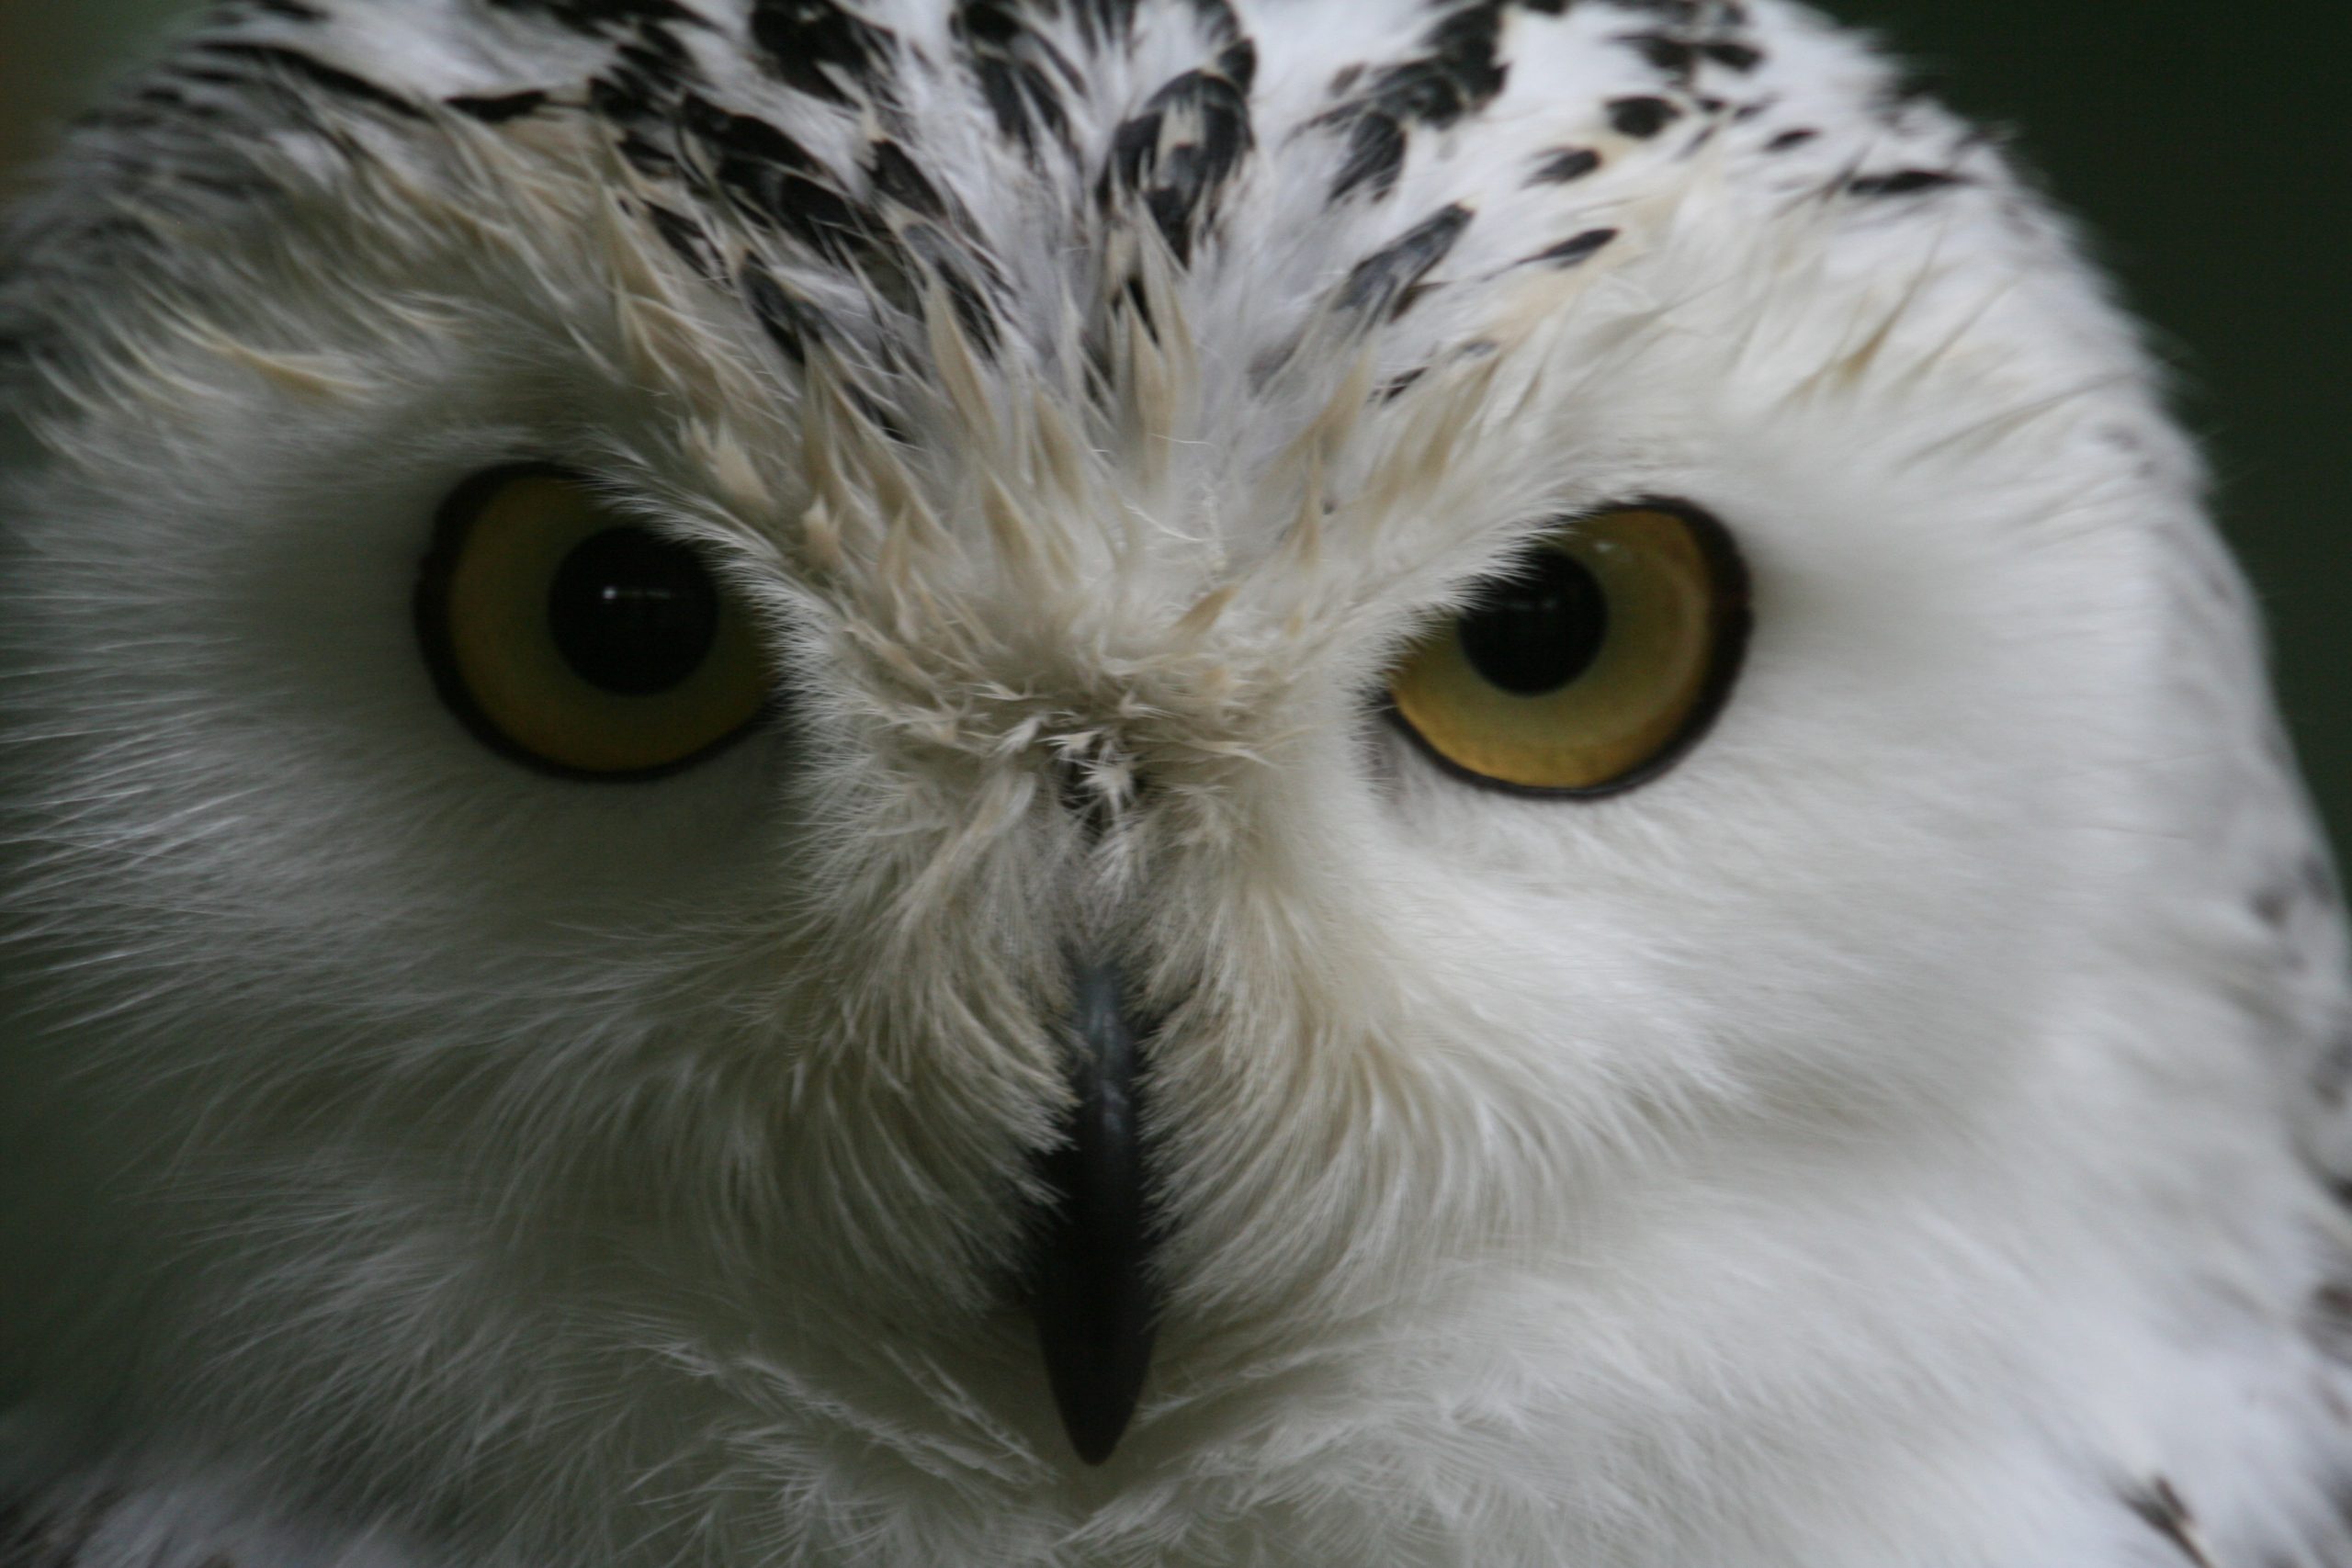 Snowy Owl (user submitted)